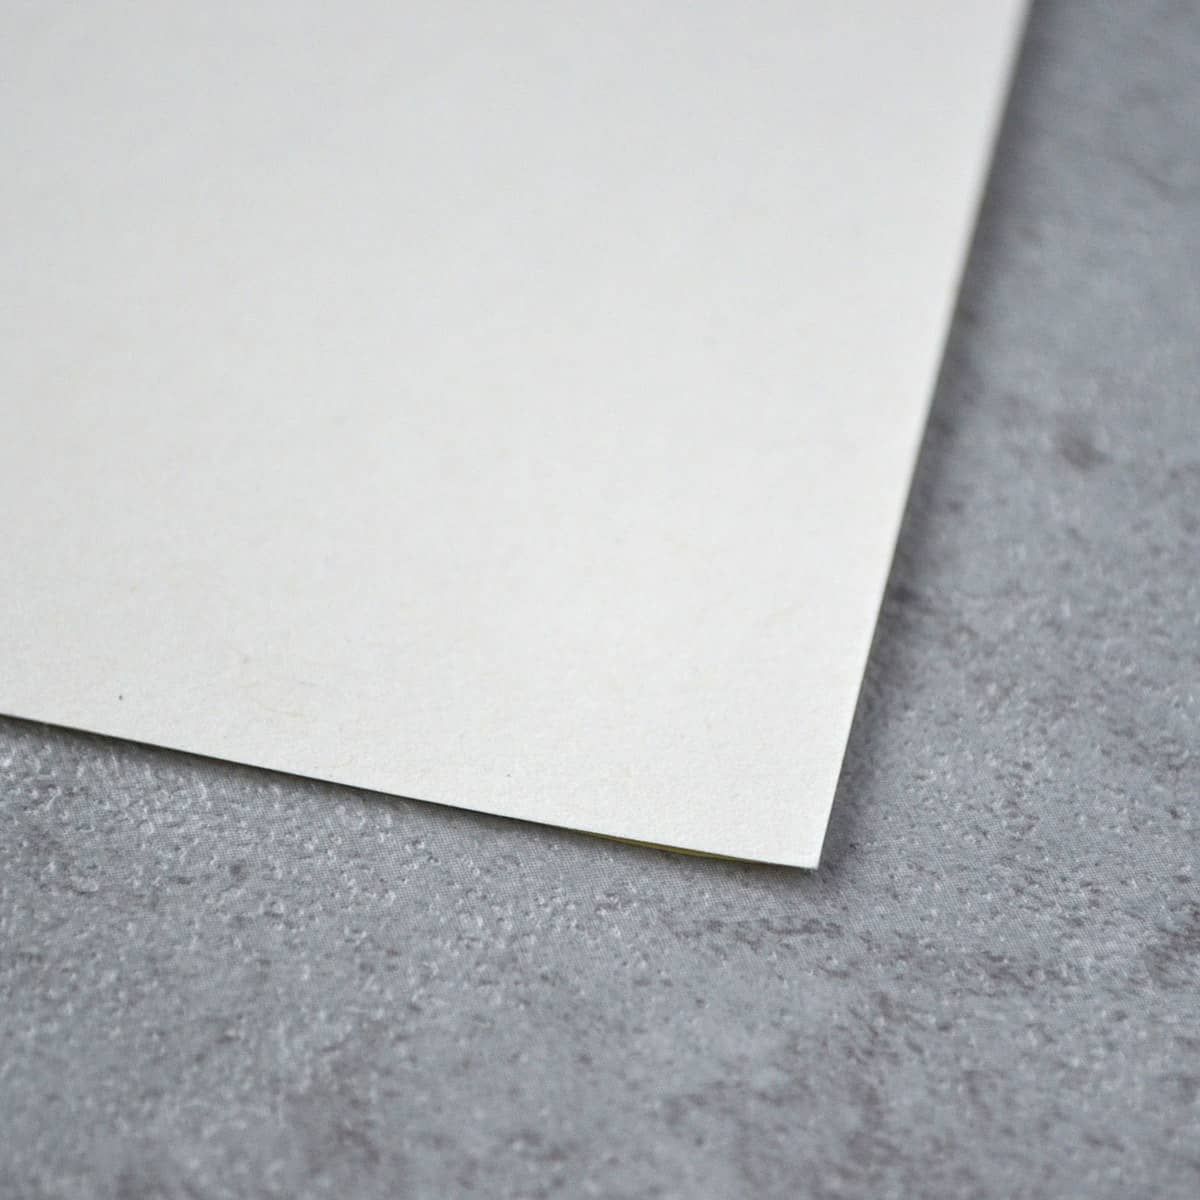 Neutral pH drawing paper